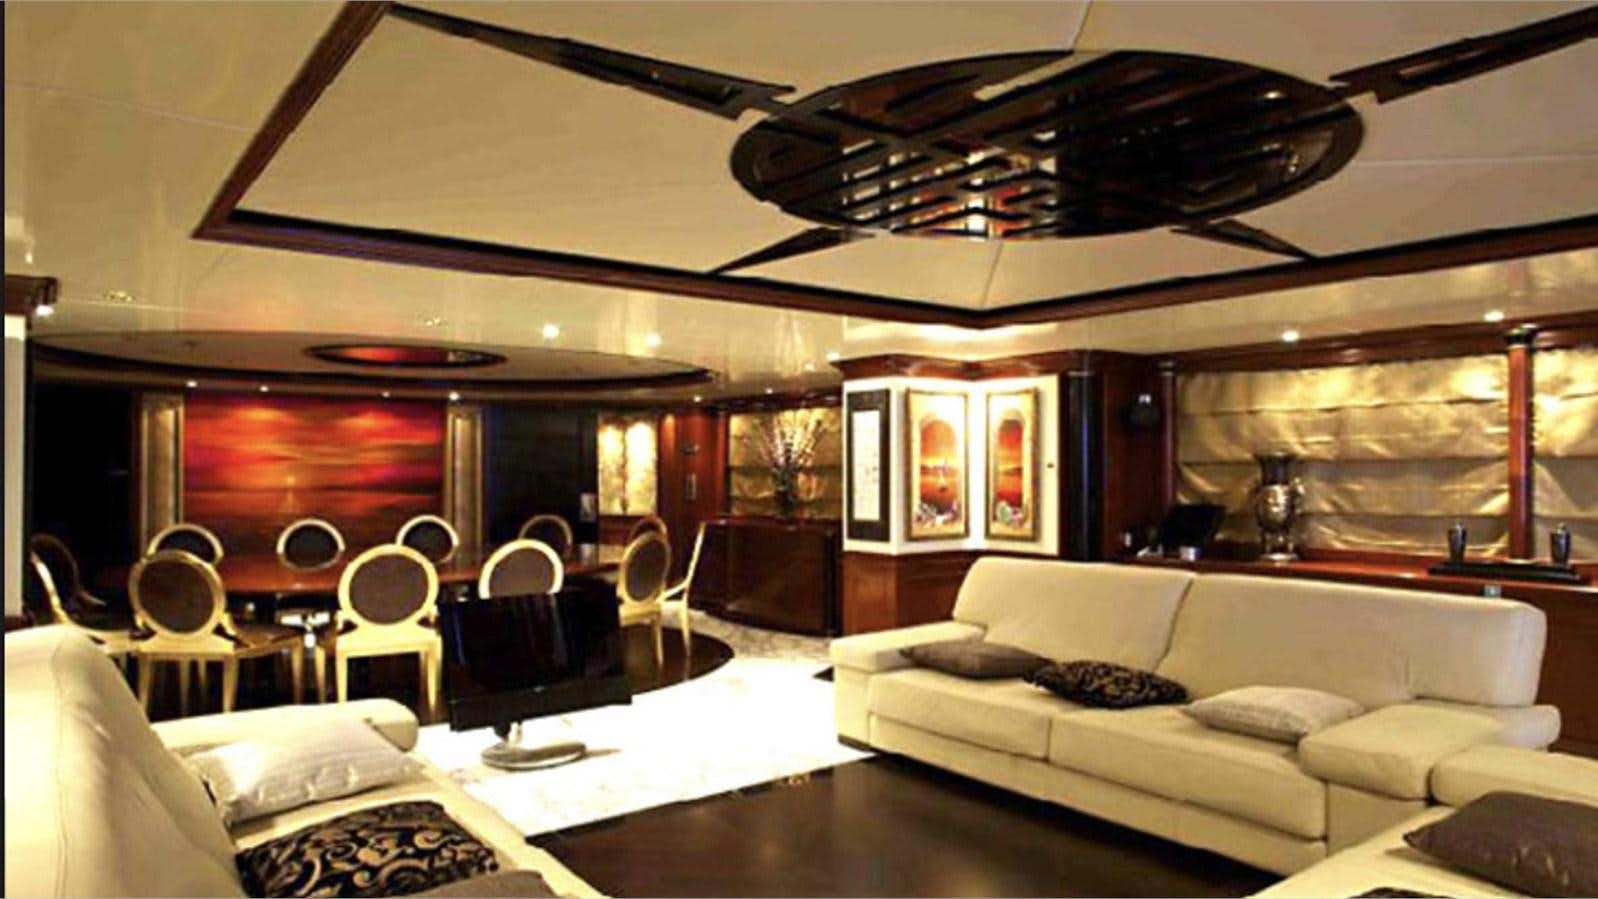 Moza
Yacht for Sale